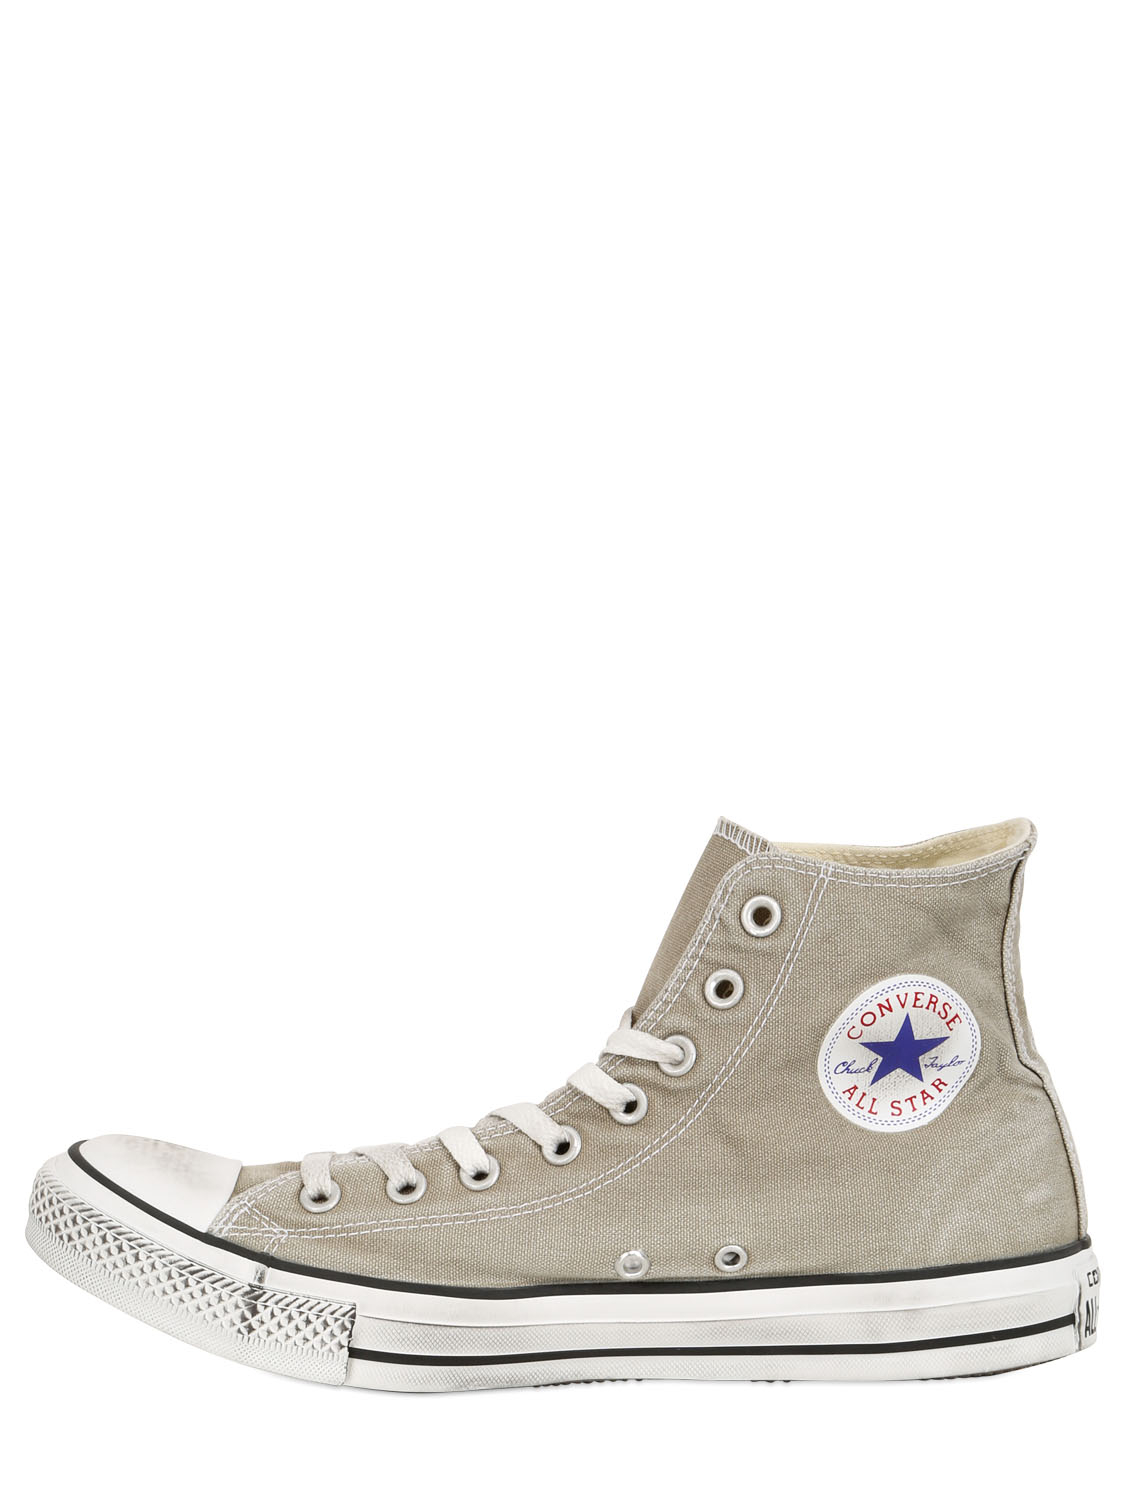 Converse Limited Edition All Stars Sneakers in Khaki (Natural) for Men ...